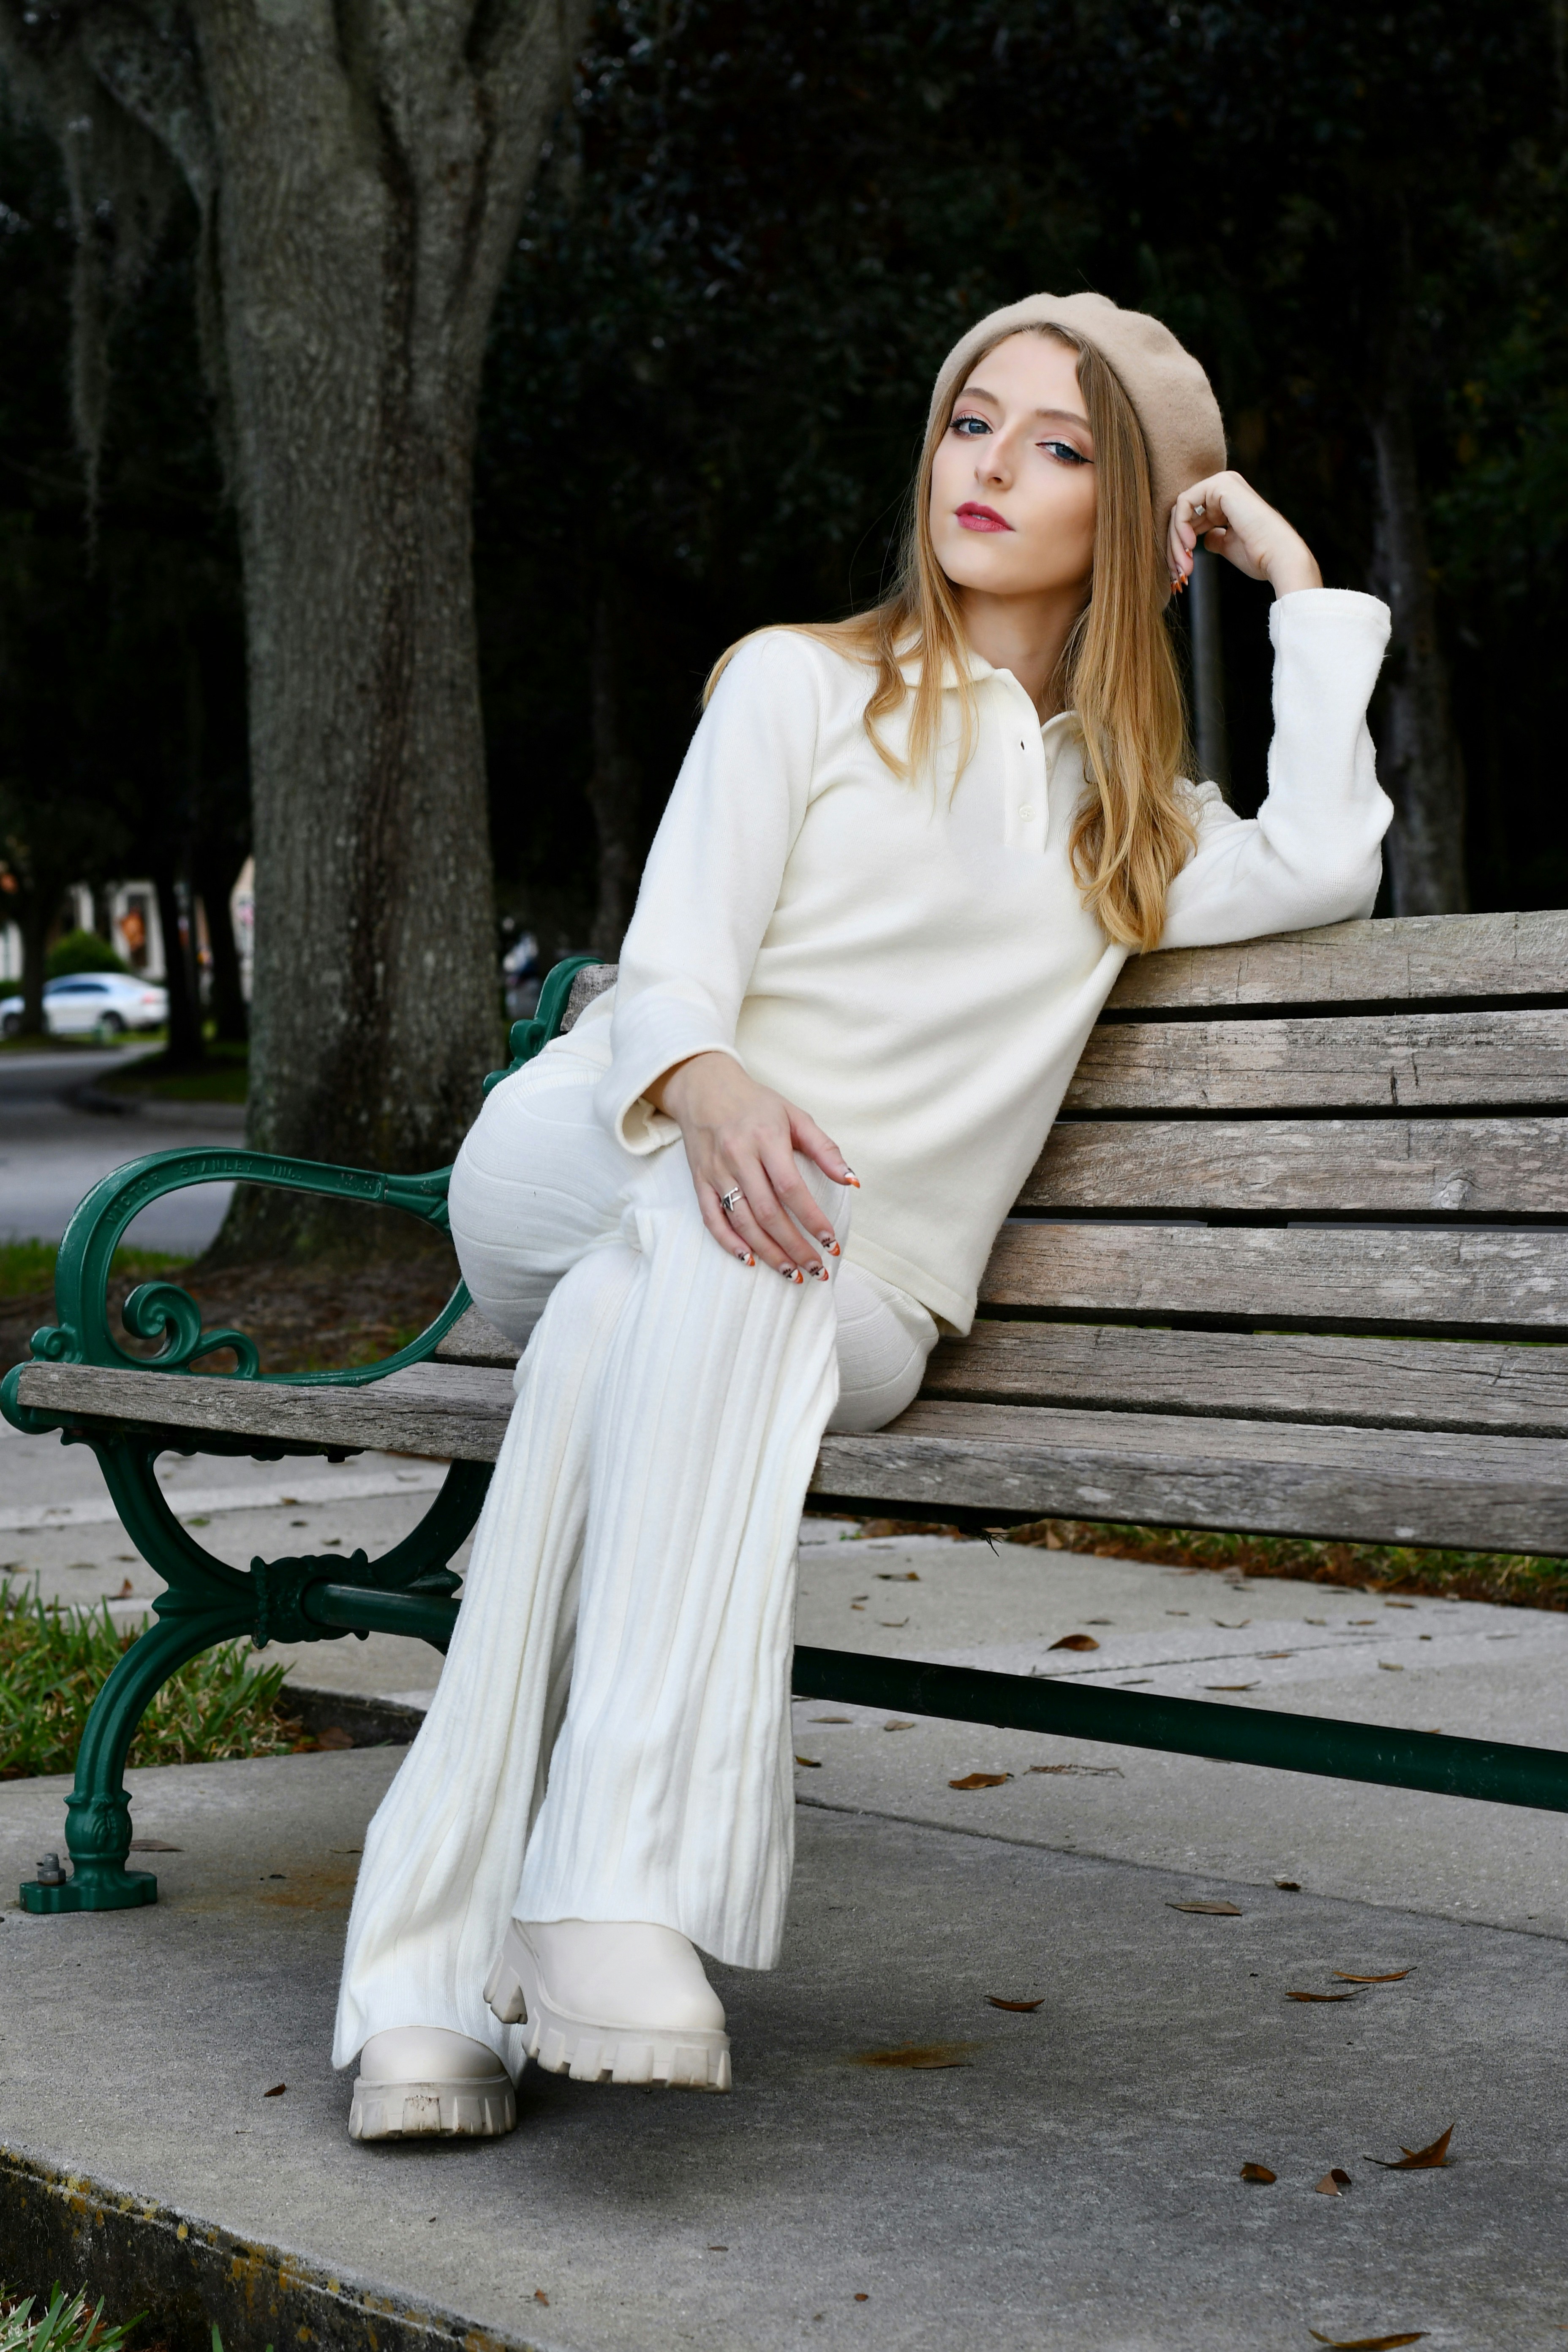 great photo recipe,how to photograph a girl on a bench in all white; a woman sitting on a bench in a park